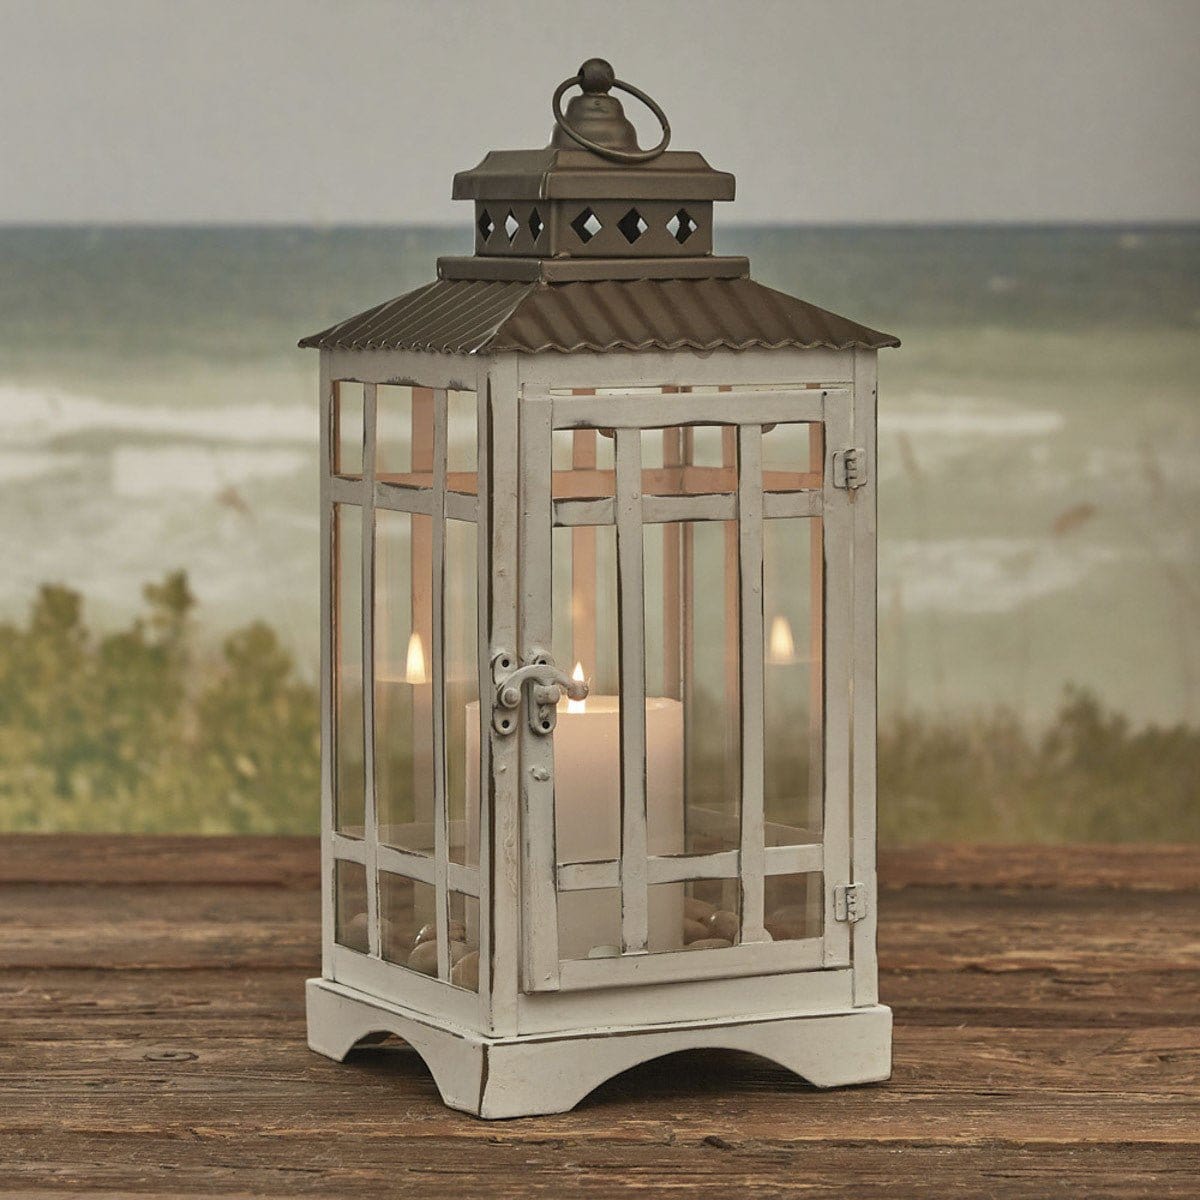 Distressed - Large White Lantern Candle Holder For Pillar Candles-Park Designs-The Village Merchant